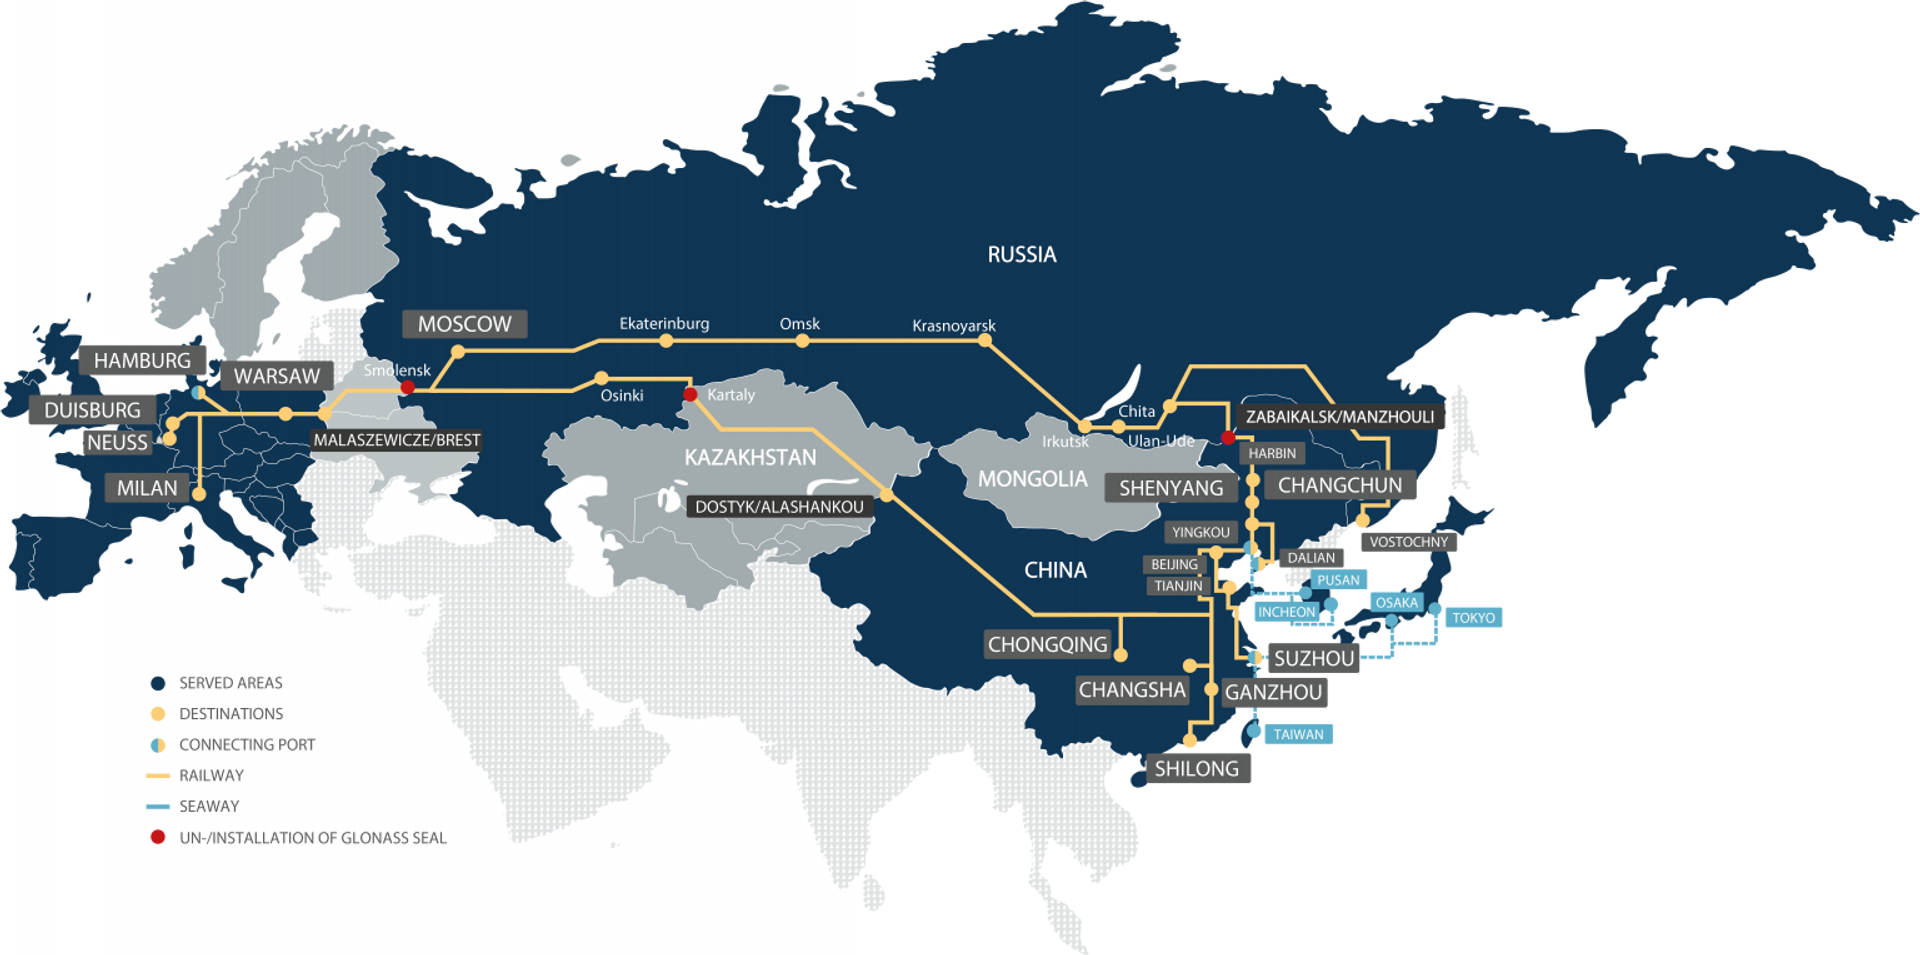 China Reportedly Doubled Freight Shipping to Europe Via Russia, Central Asia Before Suez Jam-up - Sputnik International, 1920, 28.03.2021